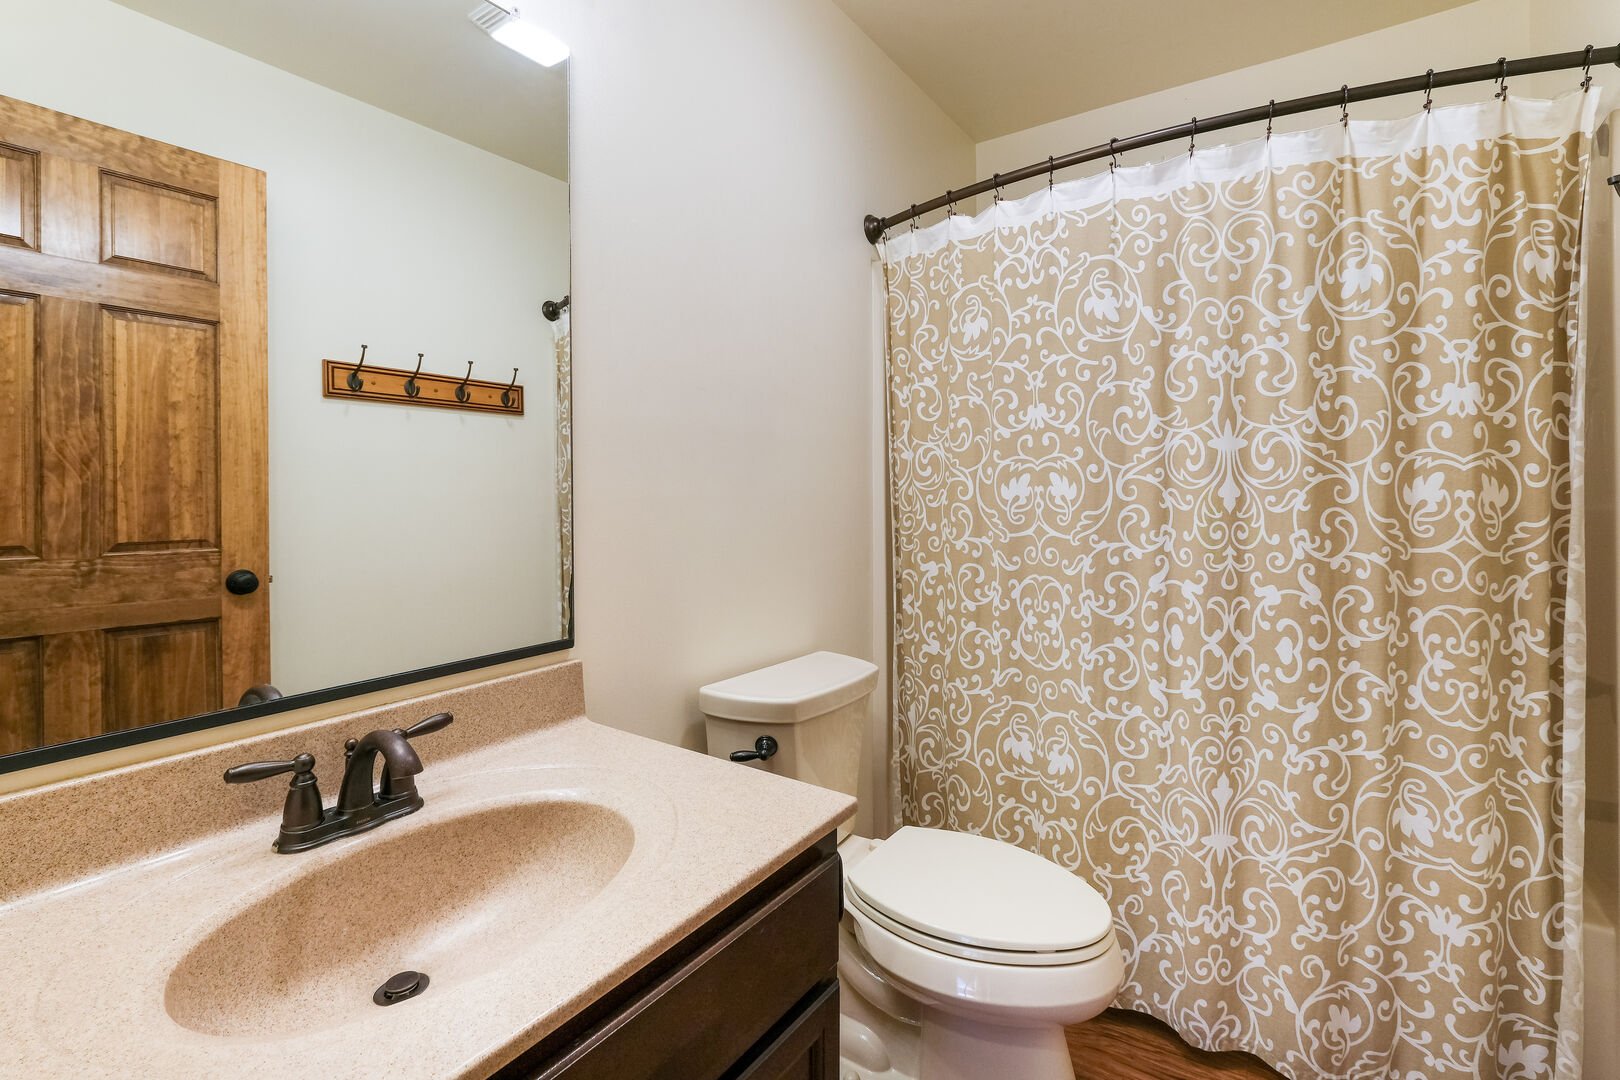 Toilet, sink, and shower of bathroom, with curtain closed and door visible in the sink mirror.